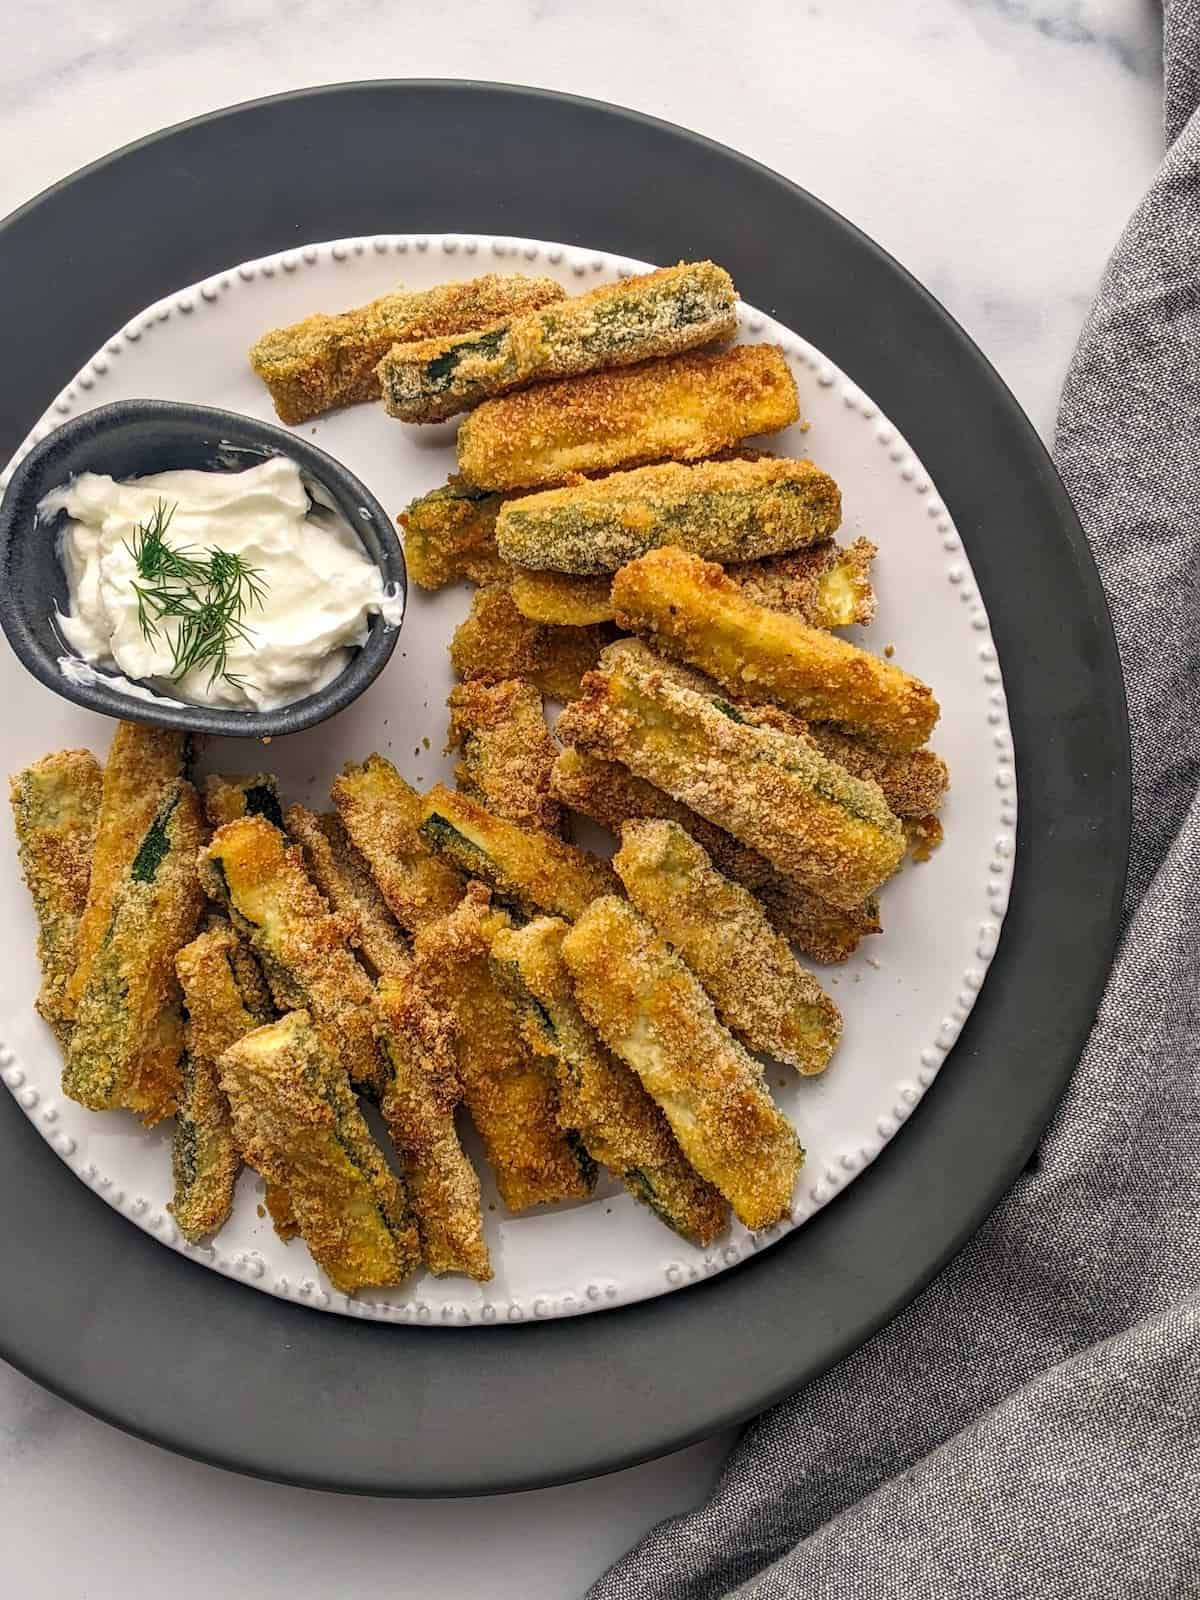 Healthy zucchini fries served on a white plate with a yogurt and dill dip.